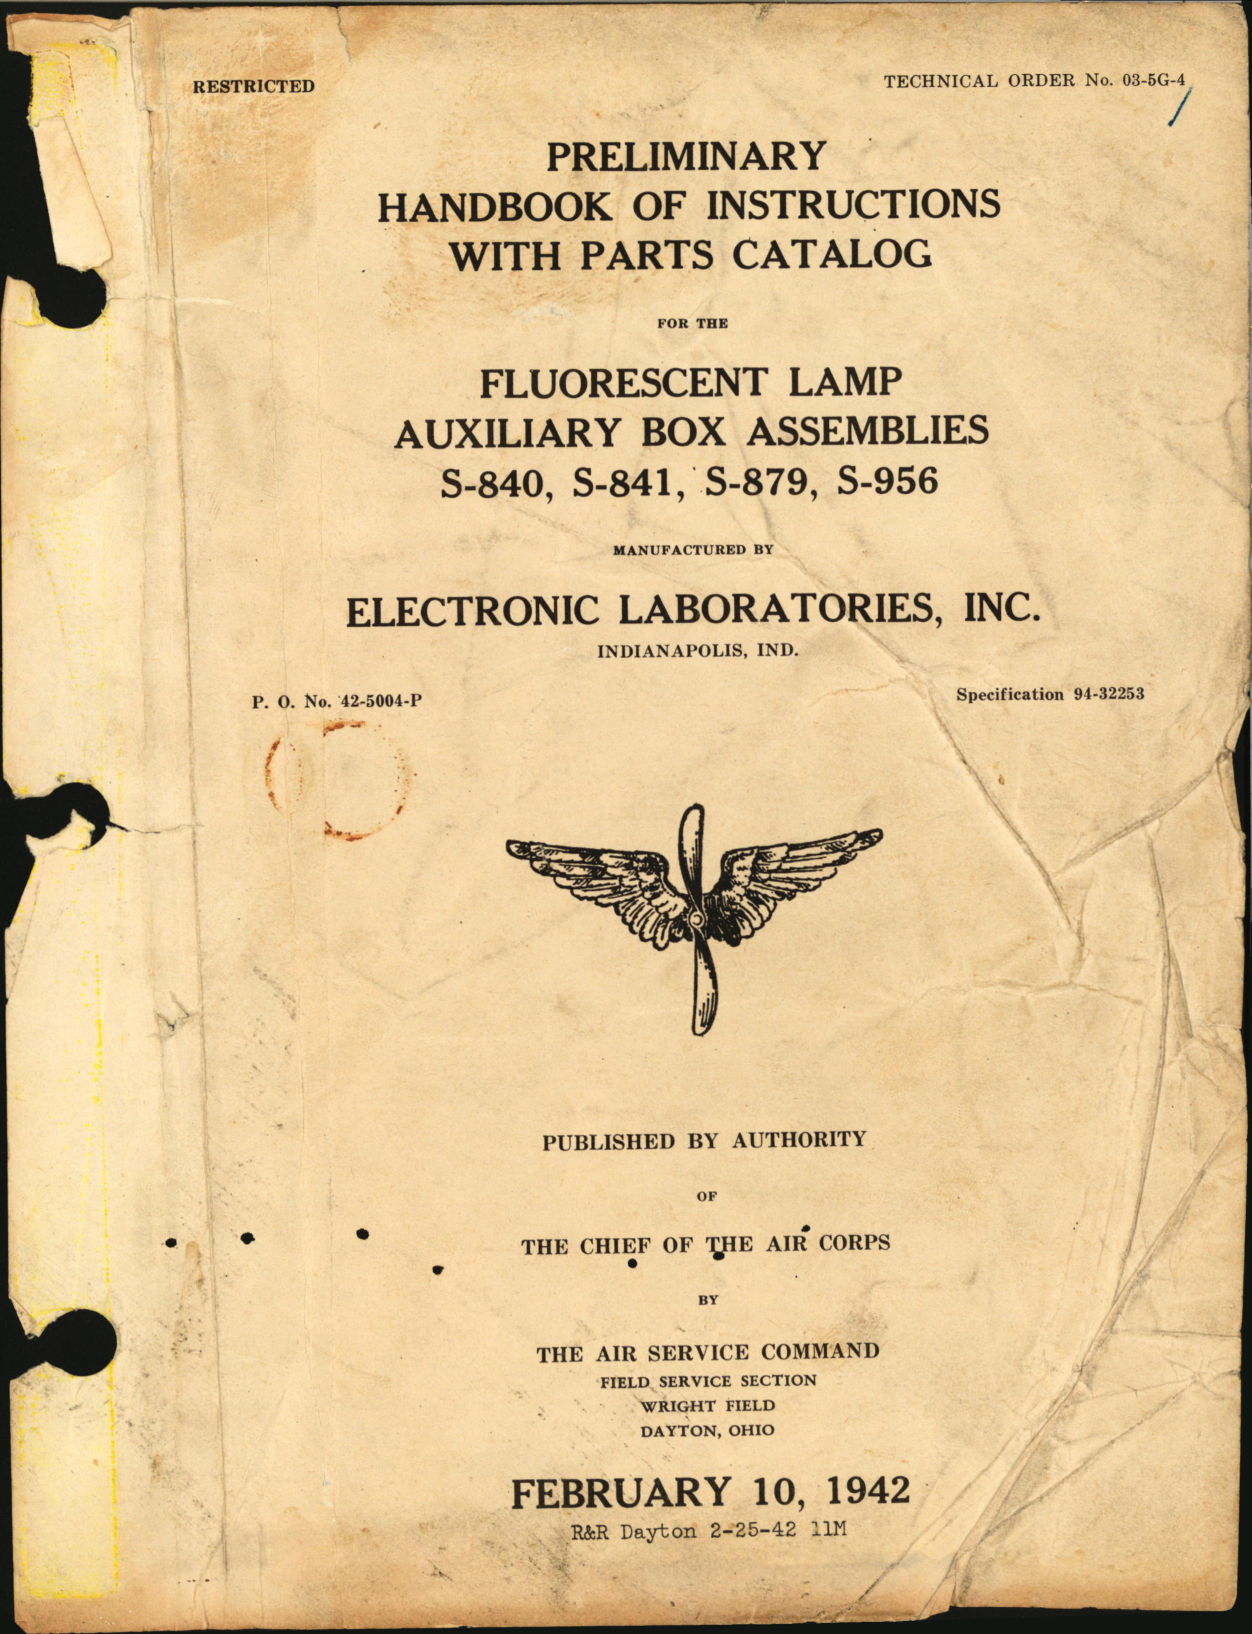 Sample page 1 from AirCorps Library document: Preliminary Handbook of Instructions with Parts Catalog for Fluorescent Lamp Auxiliary Box Assemblies S-840, S-841, S-879, and S-956